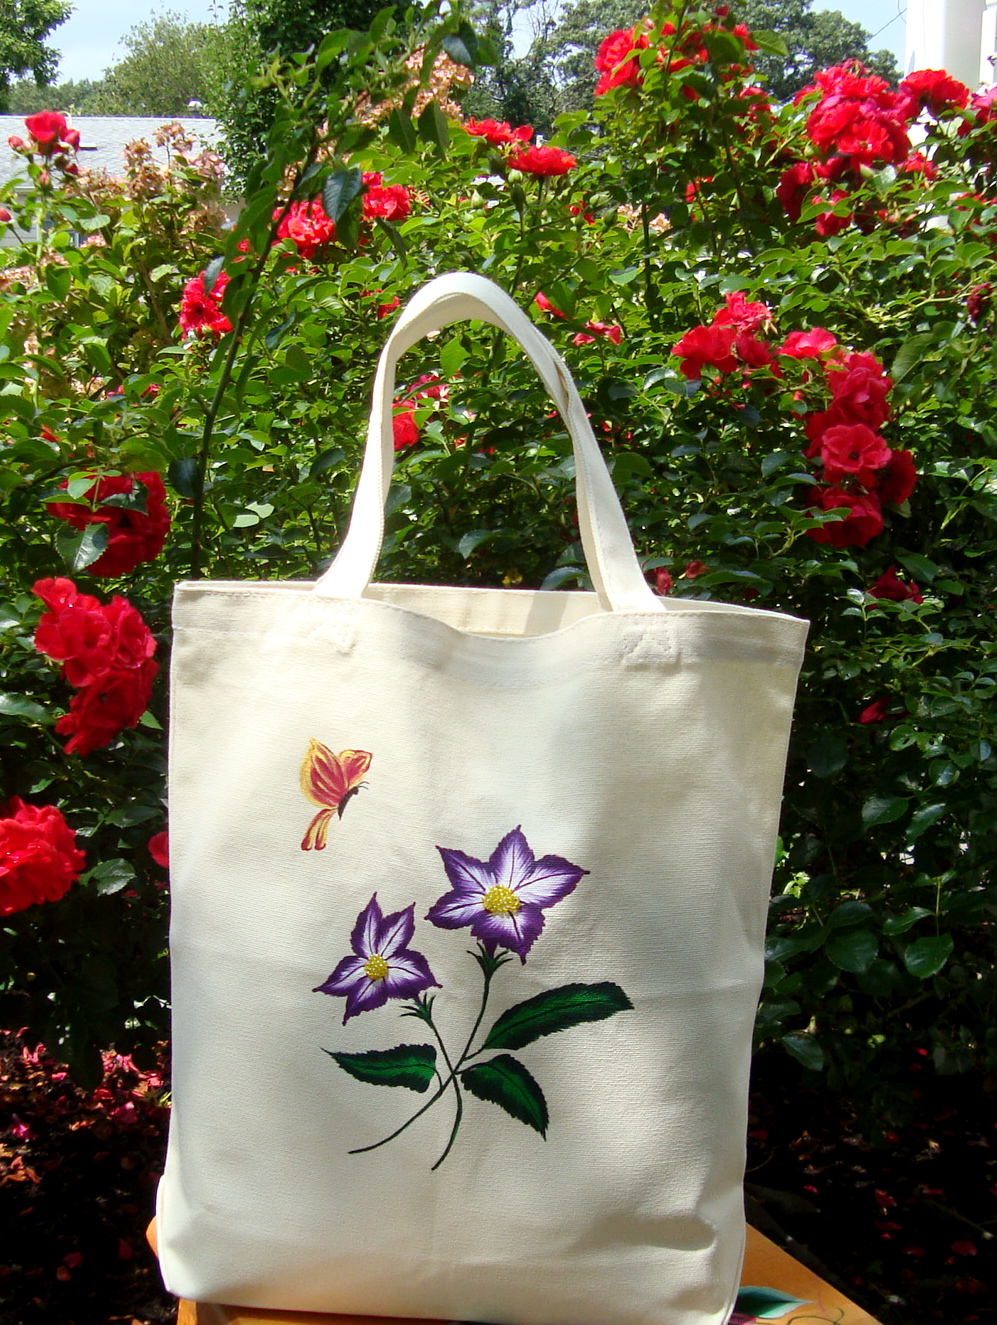 Tote Bag With Violet Flowers And A Red And Yellow Butterfly